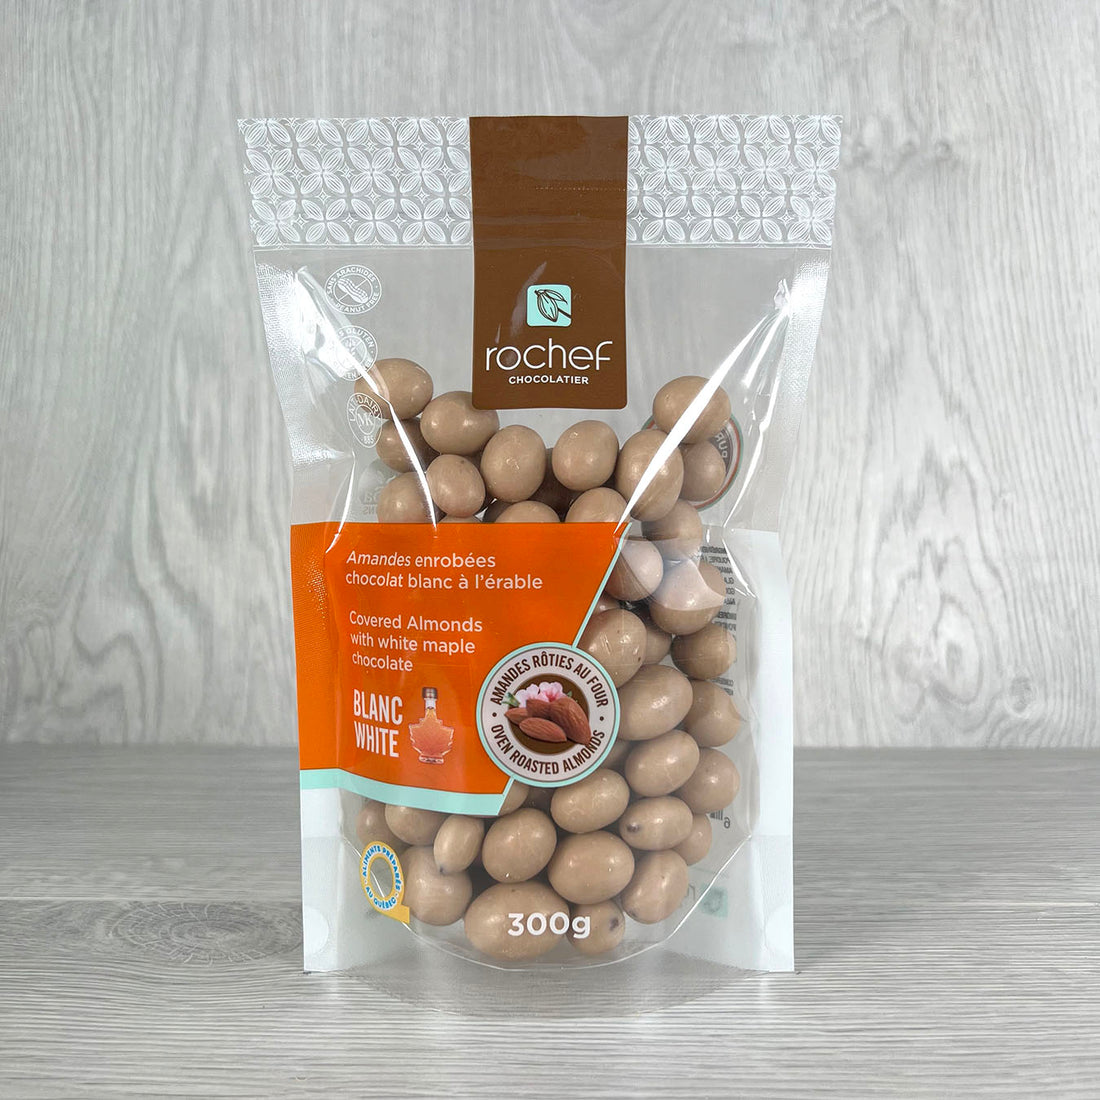  Maple white chocolate covered oven roasted almonds 300g